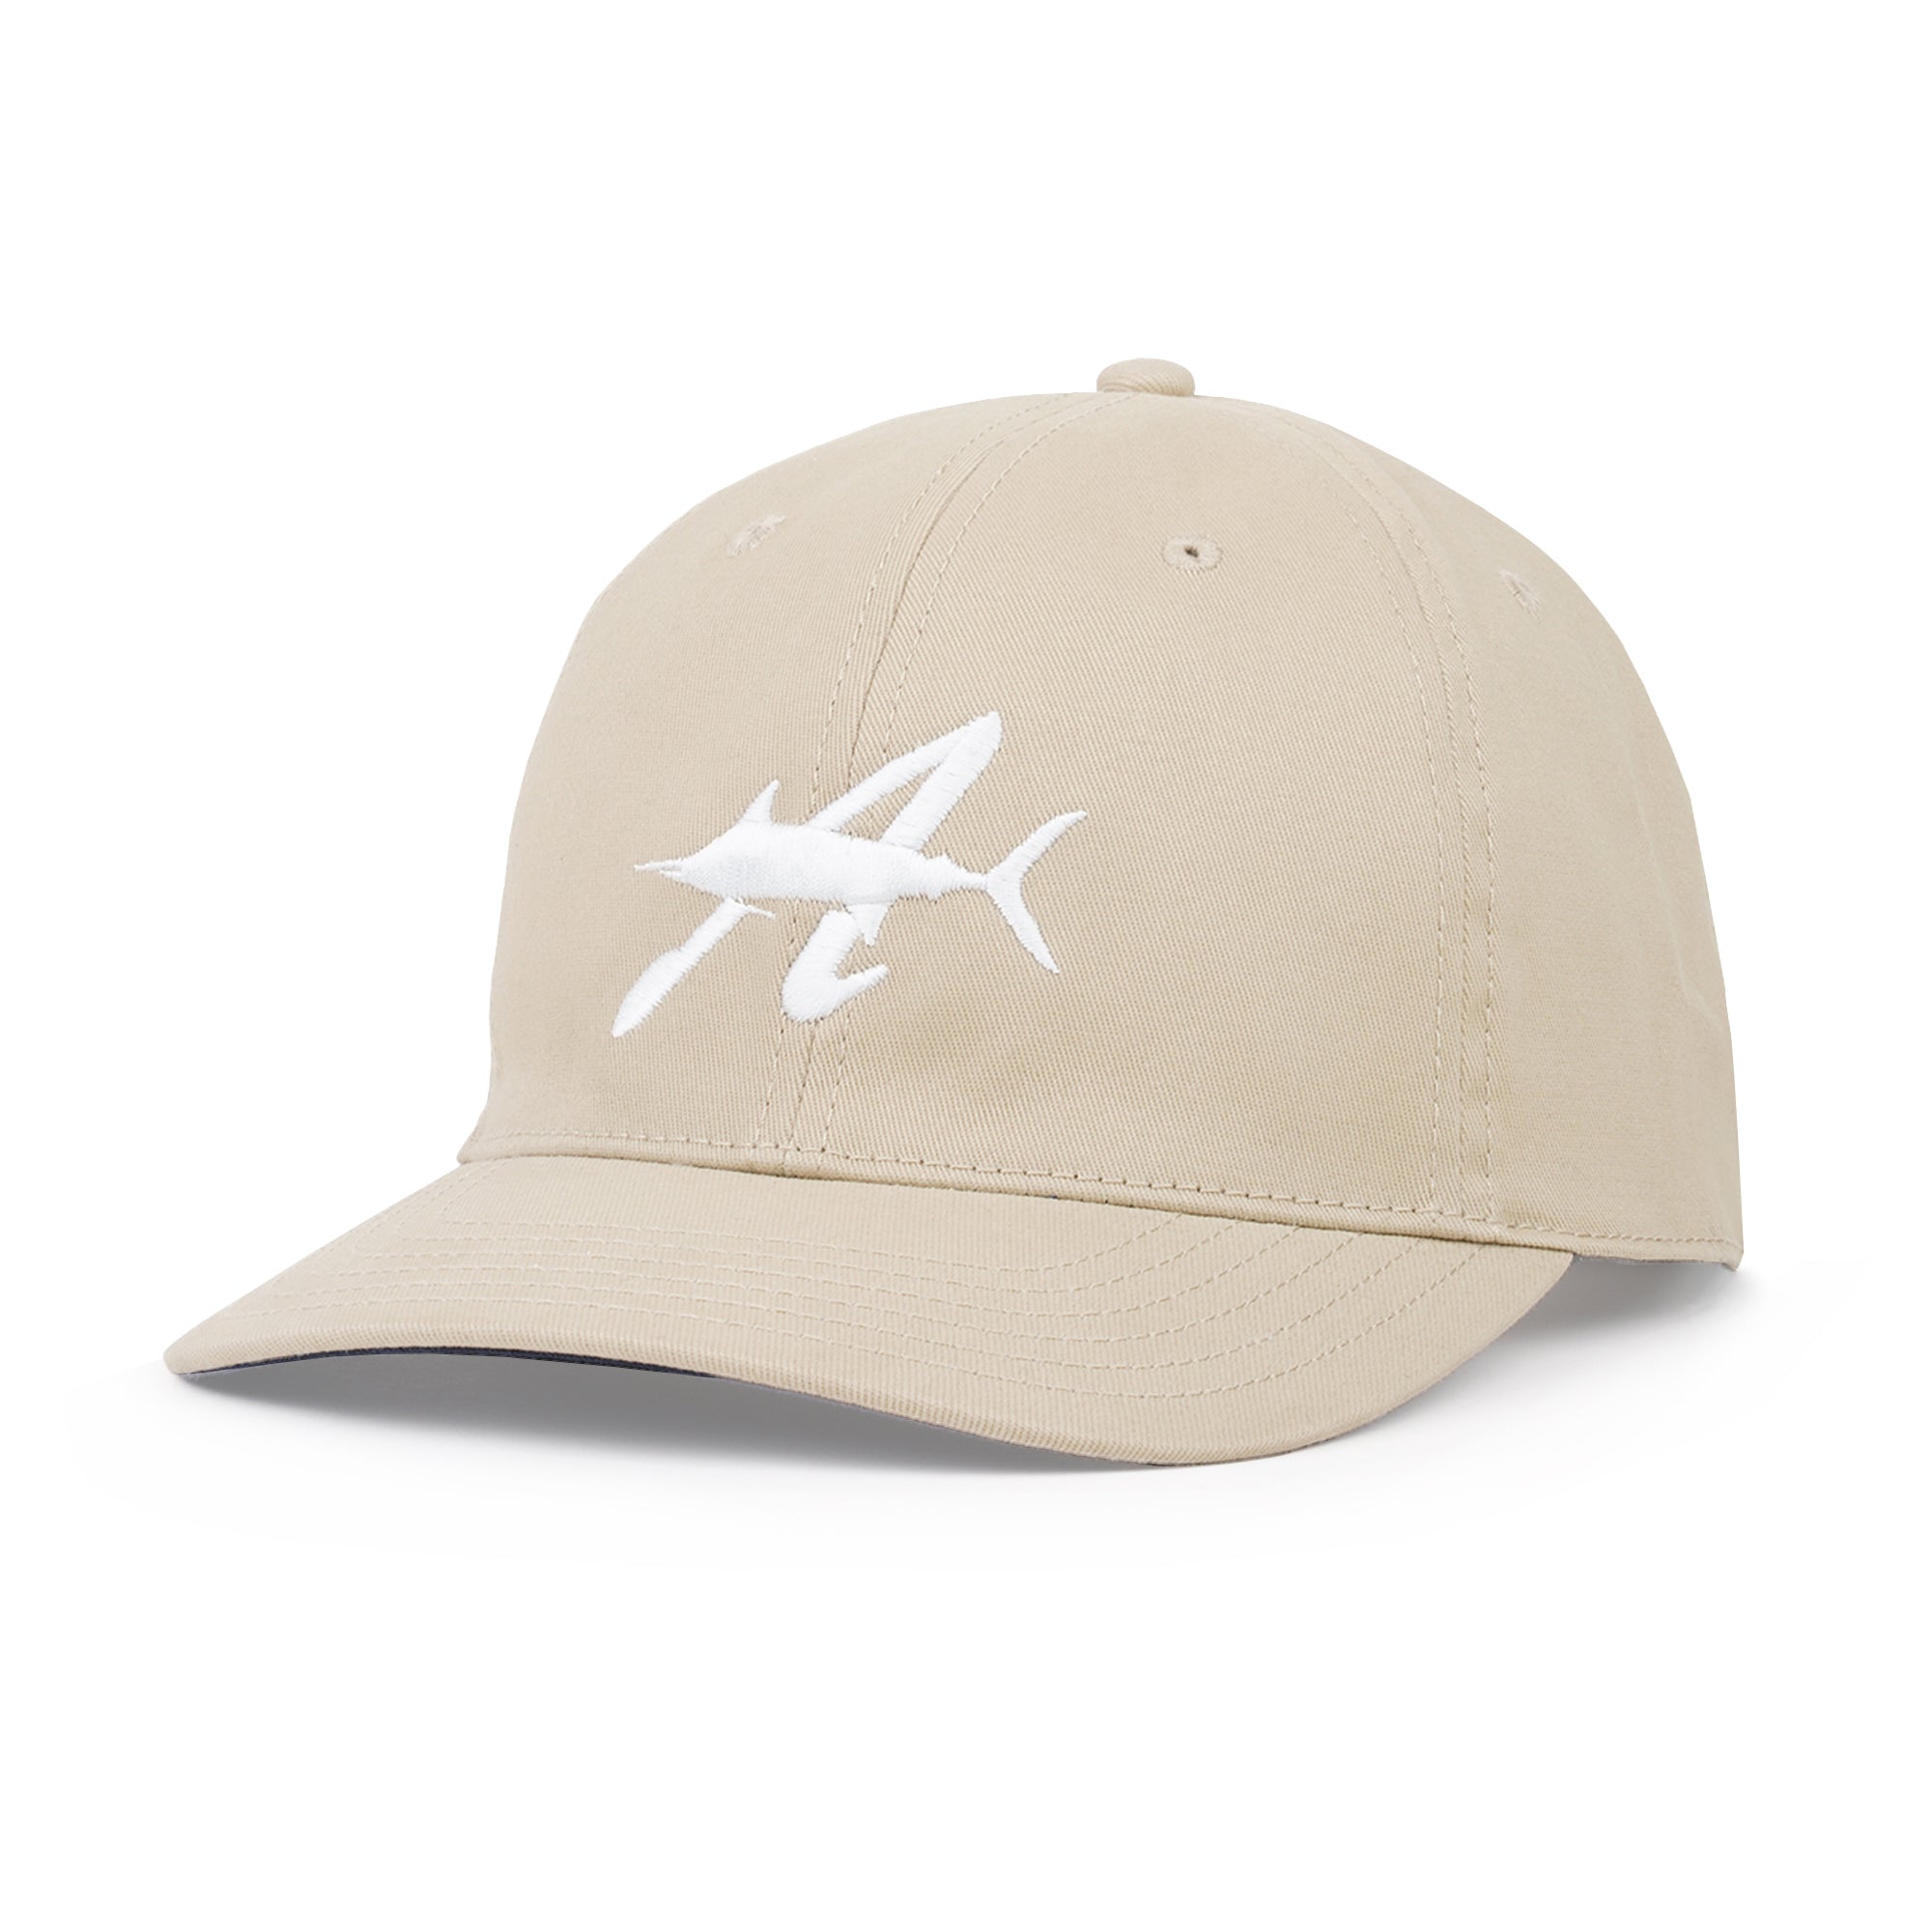 MARLIN Sport Cap TAN Fishing Hat Adjustable Embroidered Fish New AG36